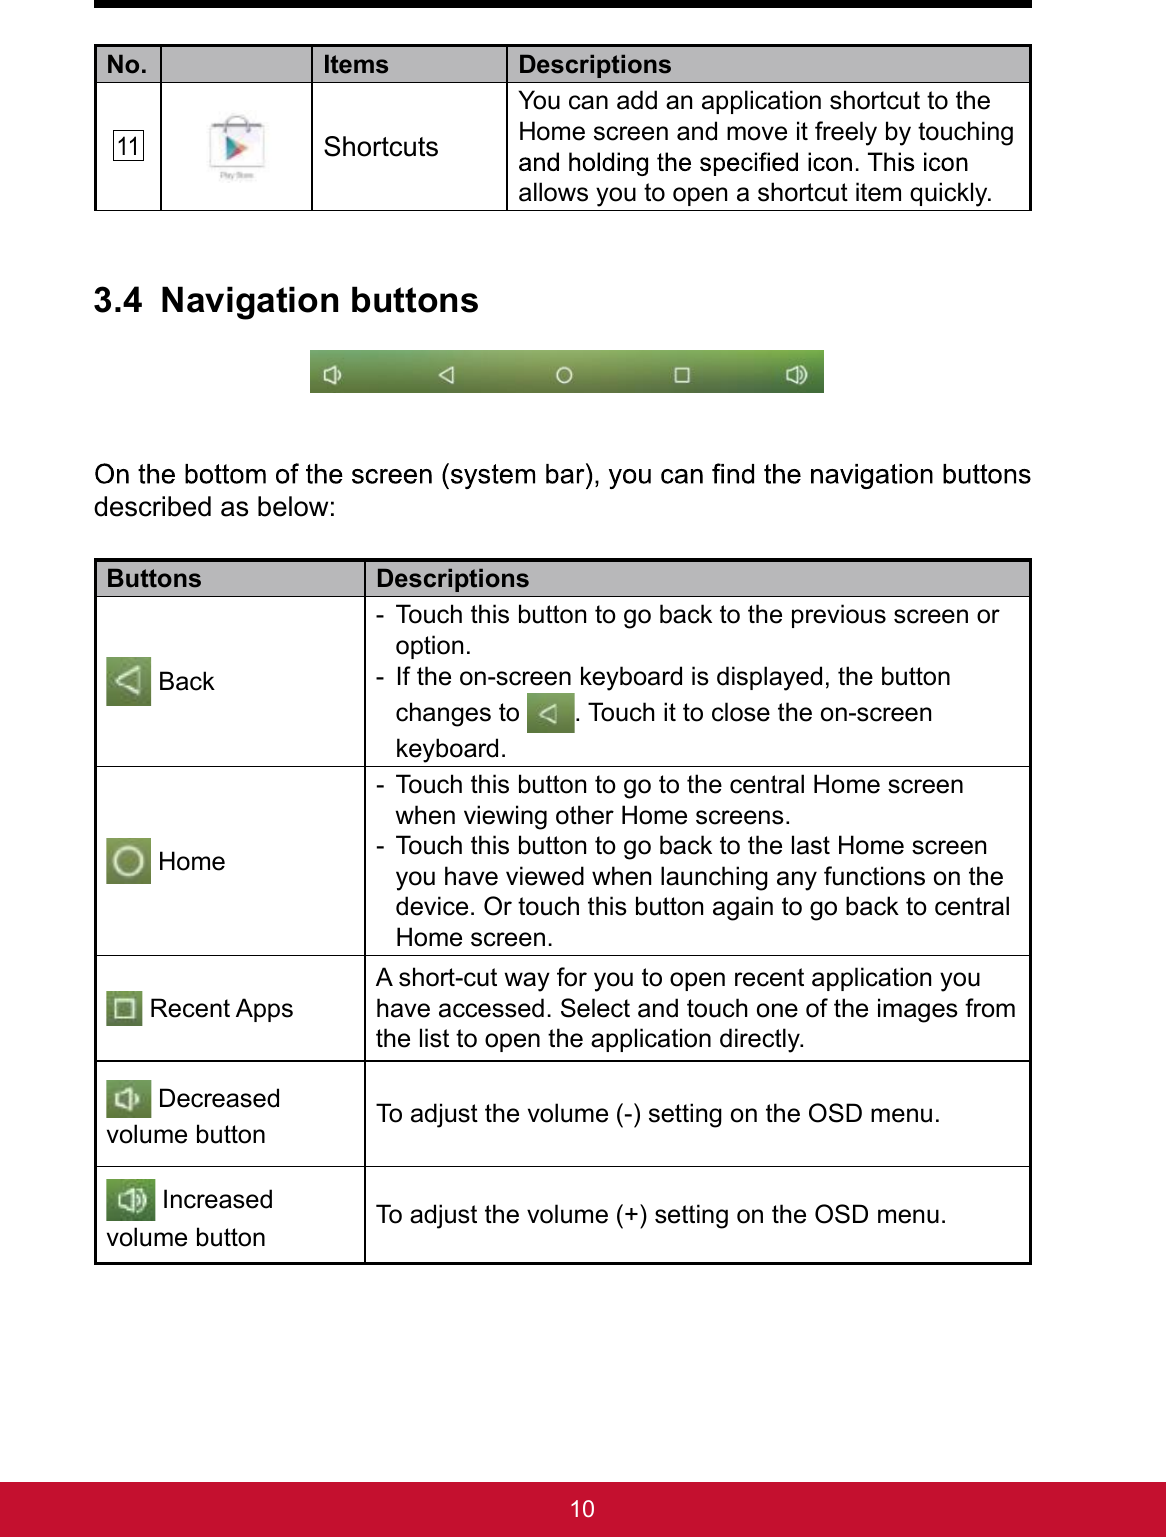 10No. Items Descriptions11ShortcutsYou can add an application shortcut to the Home screen and move it freely by touching allows you to open a shortcut item quickly.3.4 Navigation buttons described as below:Buttons Descriptions Back - Touch this button to go back to the previous screen or option.- If the on-screen keyboard is displayed, the button changes to  . Touch it to close the on-screen keyboard. Home - Touch this button to go to the central Home screen when viewing other Home screens.- Touch this button to go back to the last Home screen you have viewed when launching any functions on the device. Or touch this button again to go back to central Home screen. Recent AppsA short-cut way for you to open recent application you have accessed. Select and touch one of the images from the list to open the application directly. Decreased volume button To adjust the volume(-) setting on the OSD menu. Increased volume button To adjust the volume(+) setting on the OSD menu.